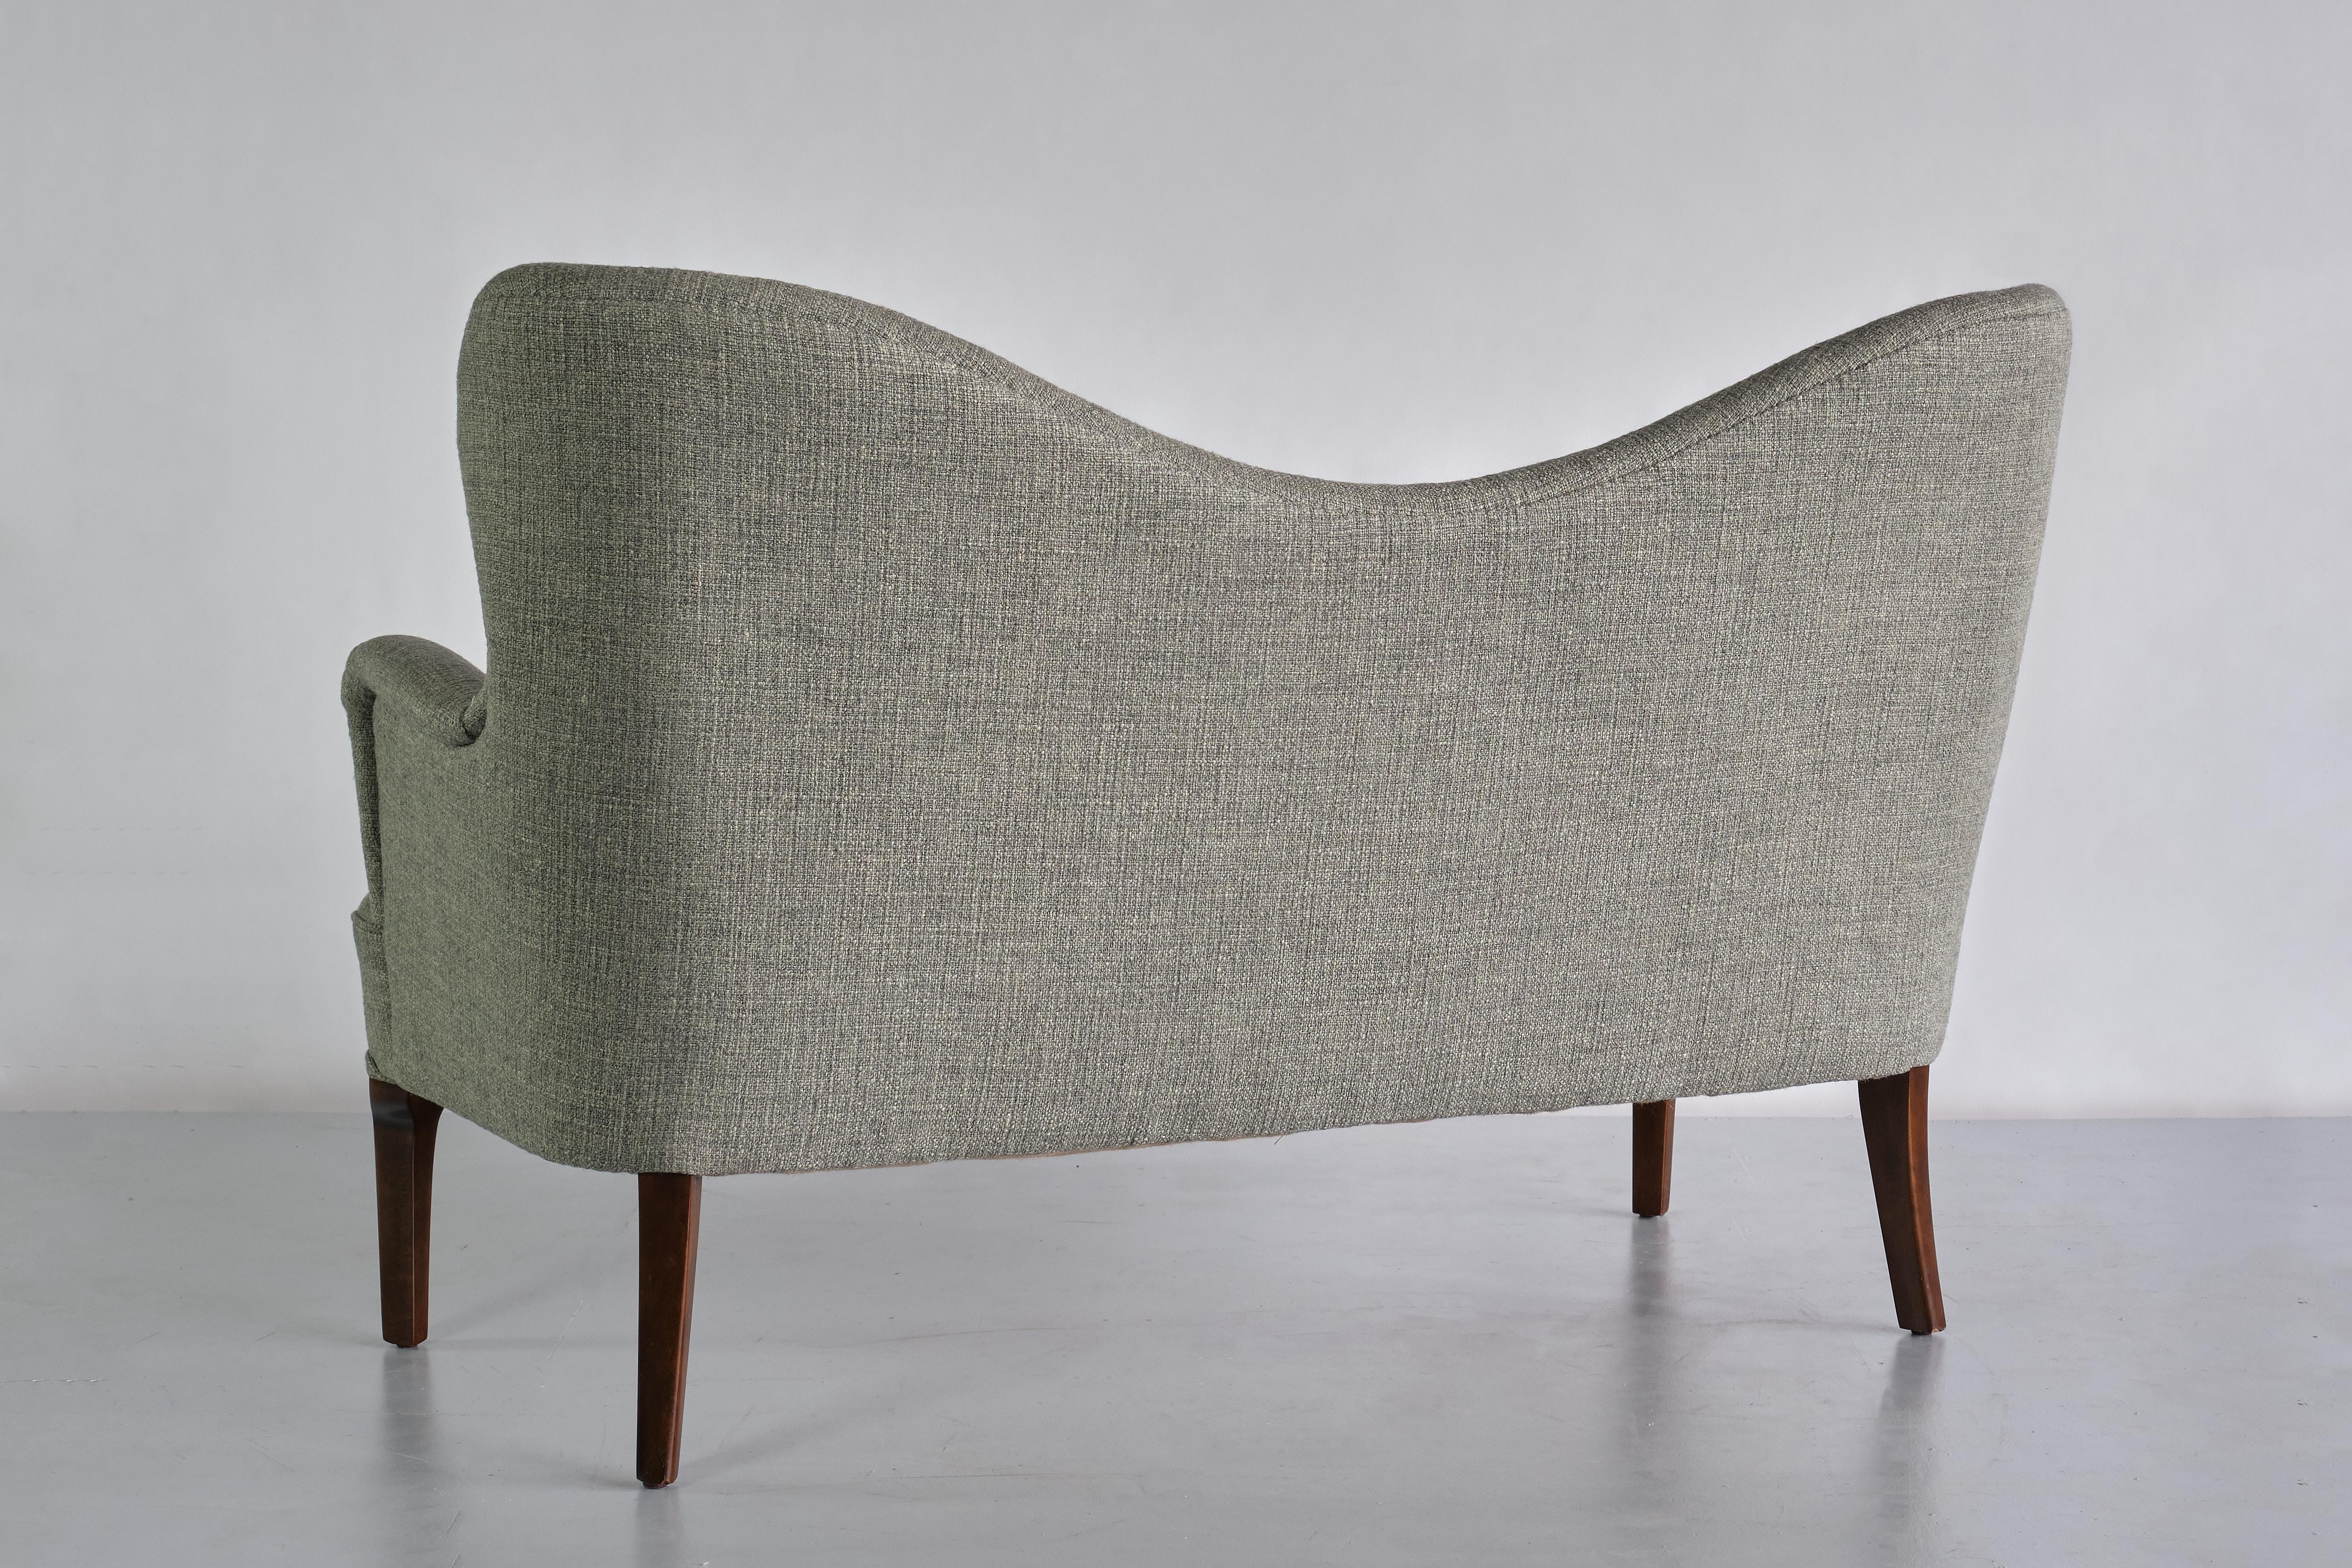 Fabric Sculptural Ernst Kühn Sofa with Wing Shaped Back, Normina A/S, Denmark, 1930s For Sale